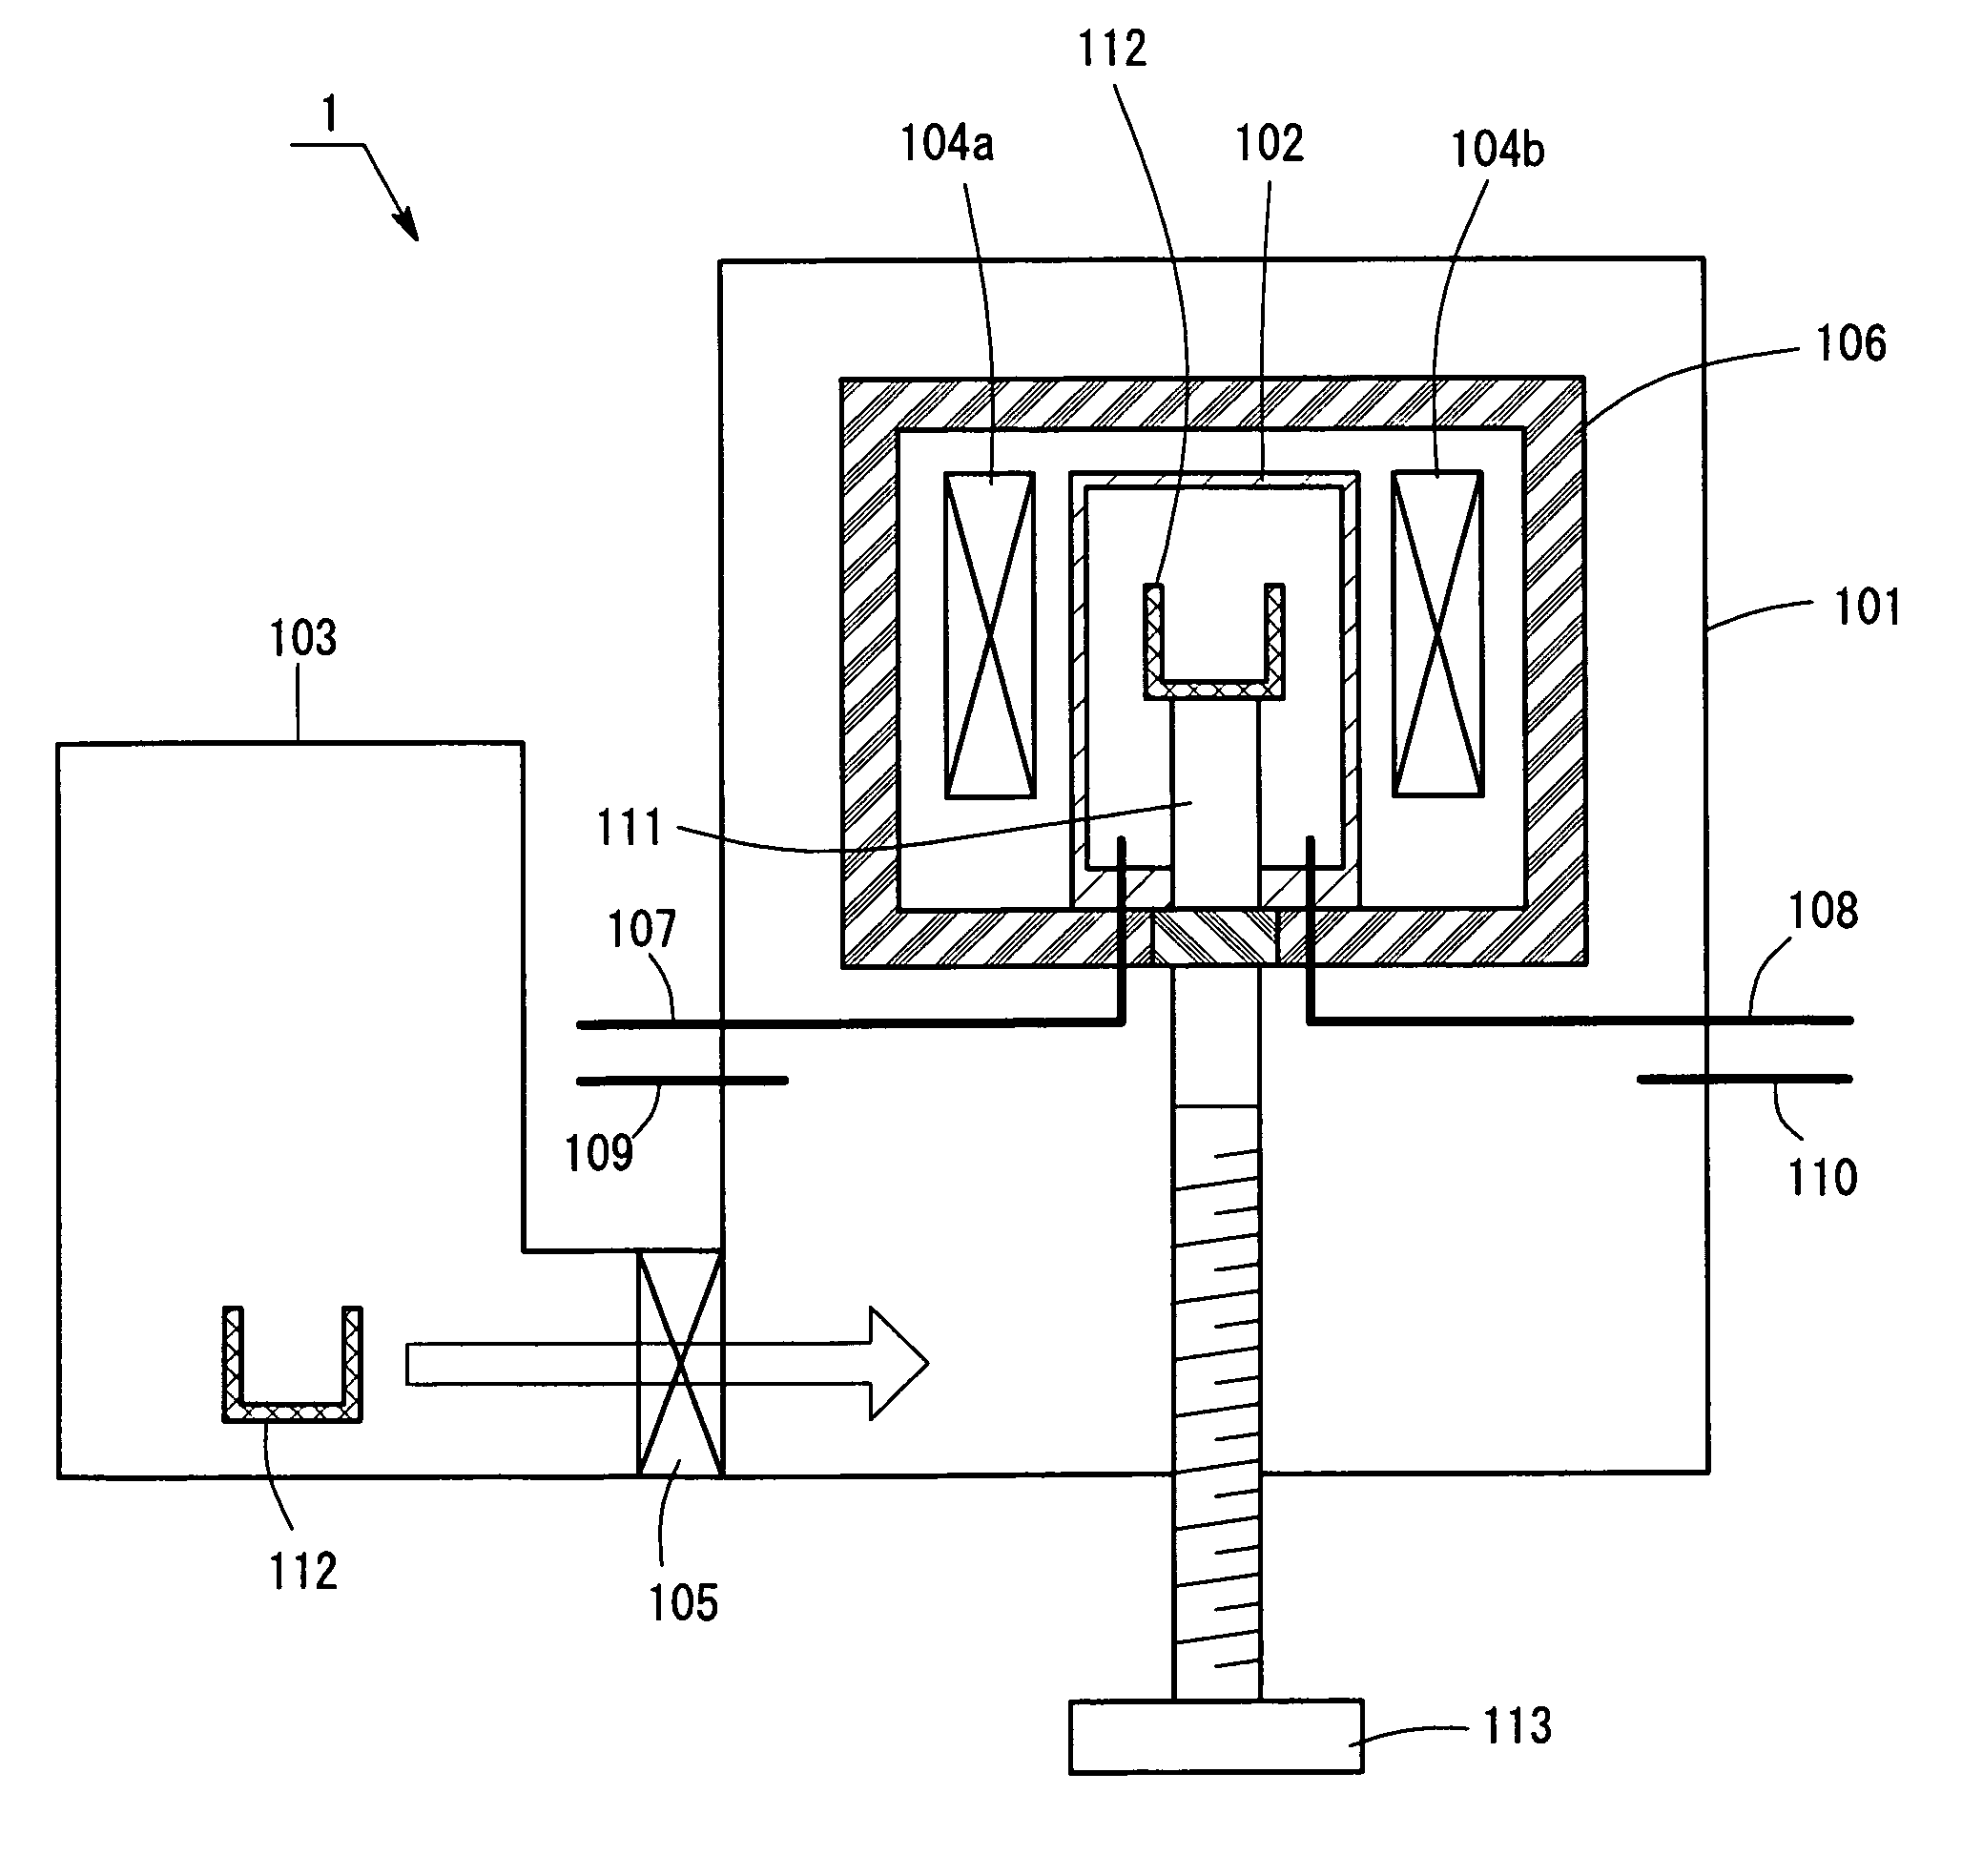 Apparatus for manufacturing group III nitride semiconductor